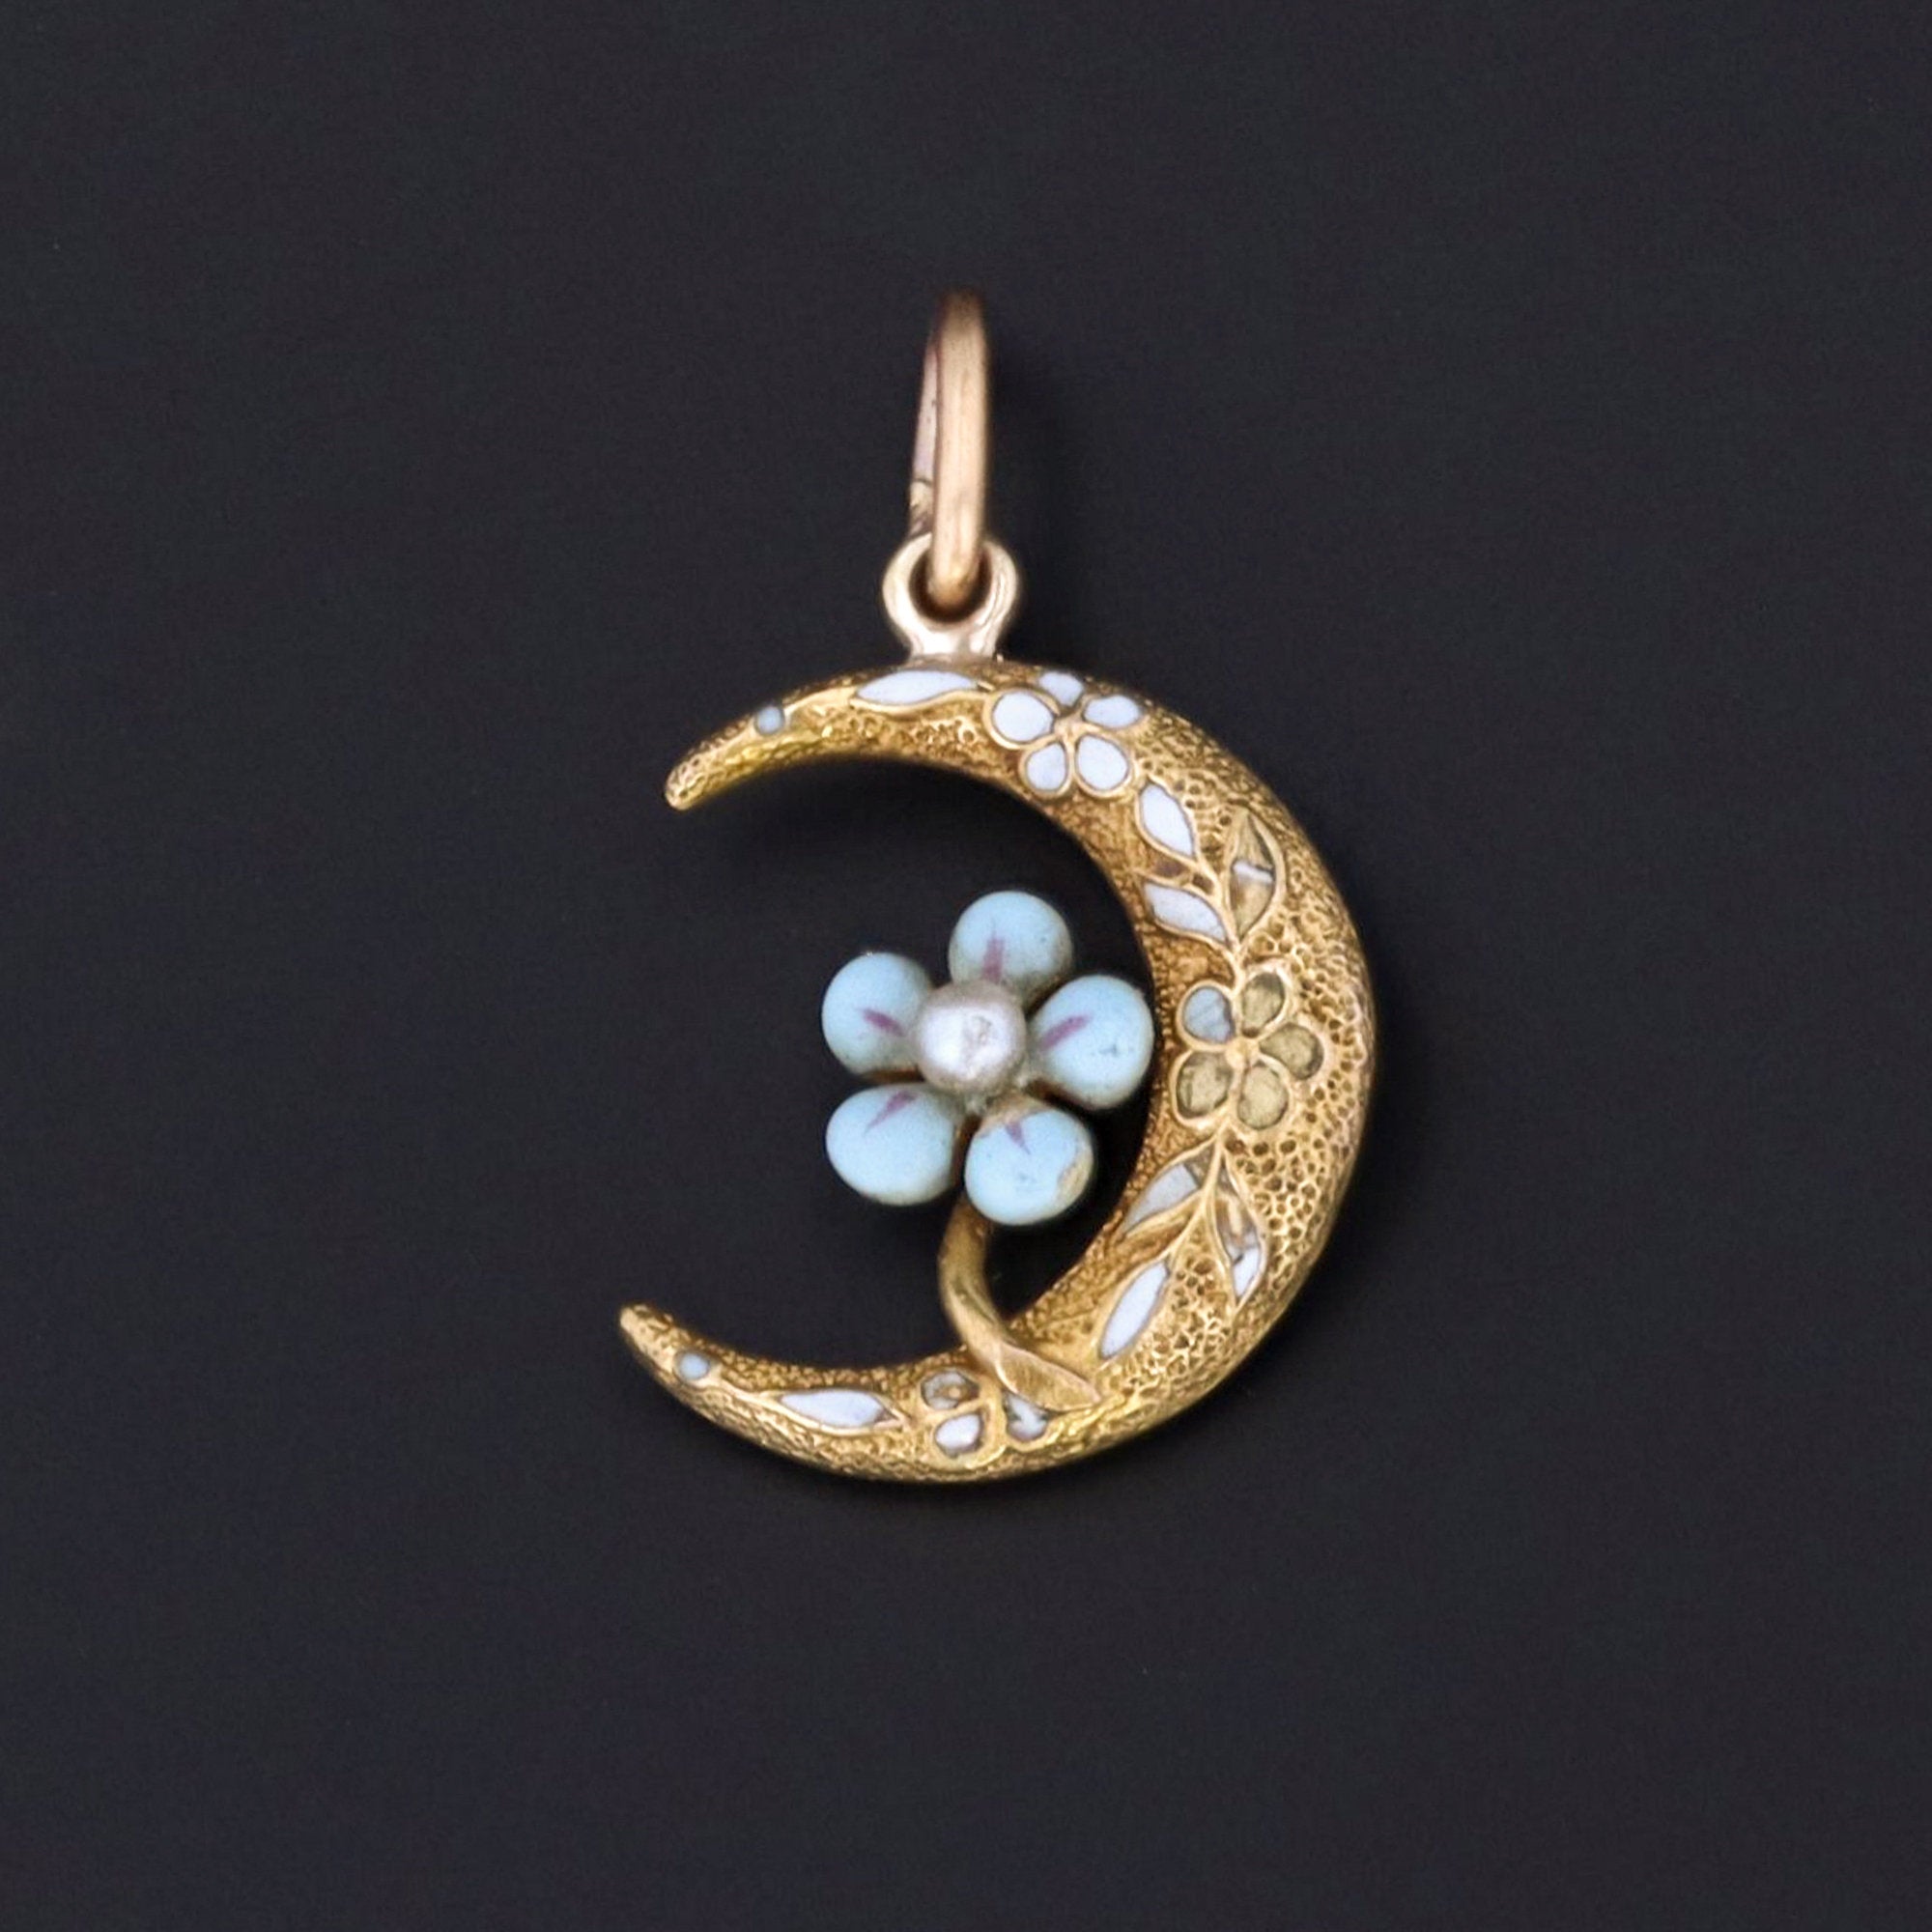 14k Gold Crescent Moon Charm | Forget-me-not Crescent Charm | Enamel Charm | 14k Gold Charm | Flower Charm | Crescent Moon Pendant